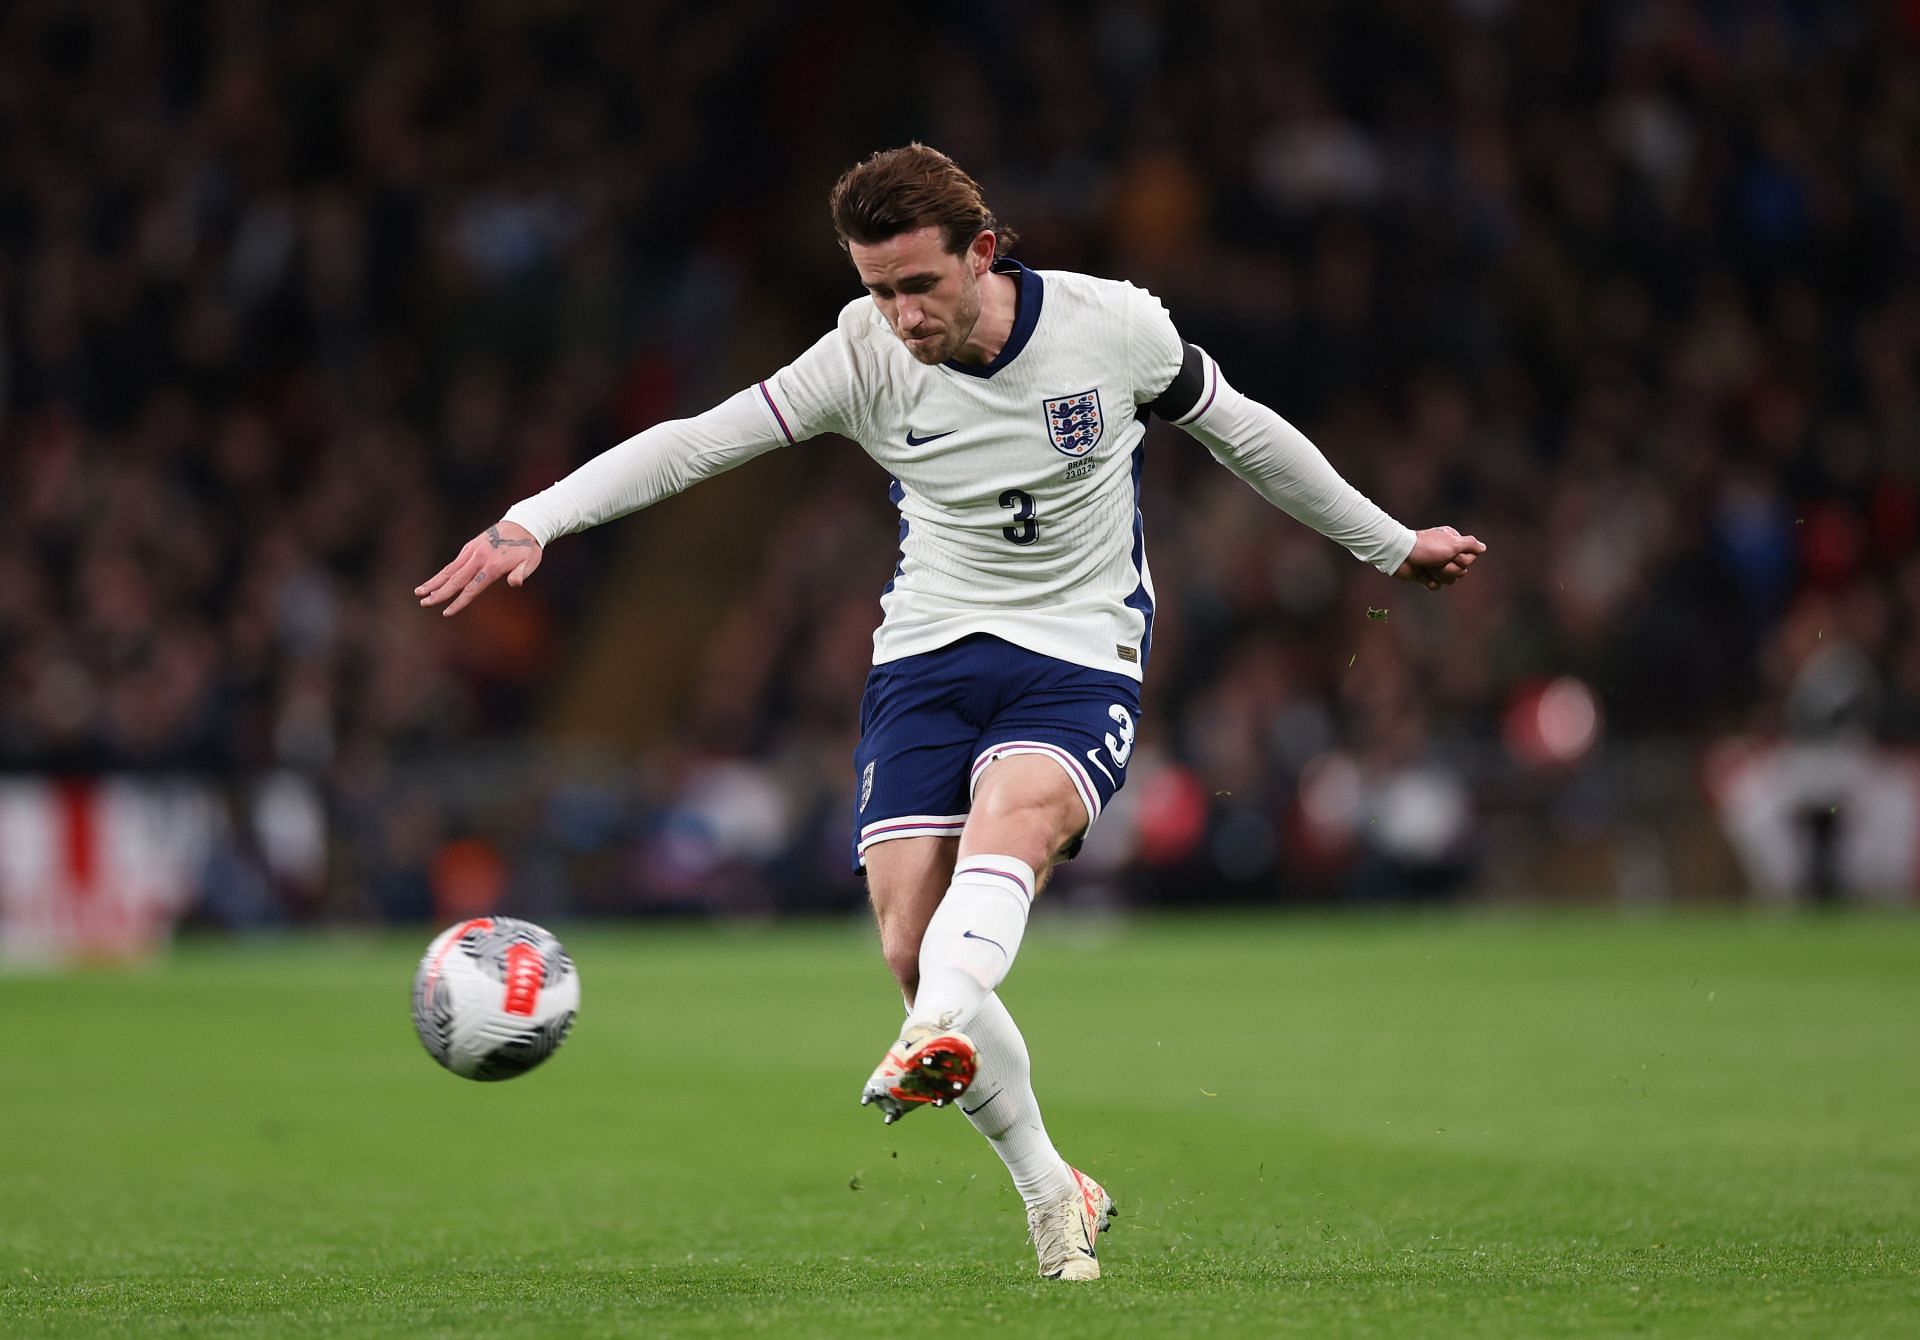 Ben Chilwell started both matches for England during the international break